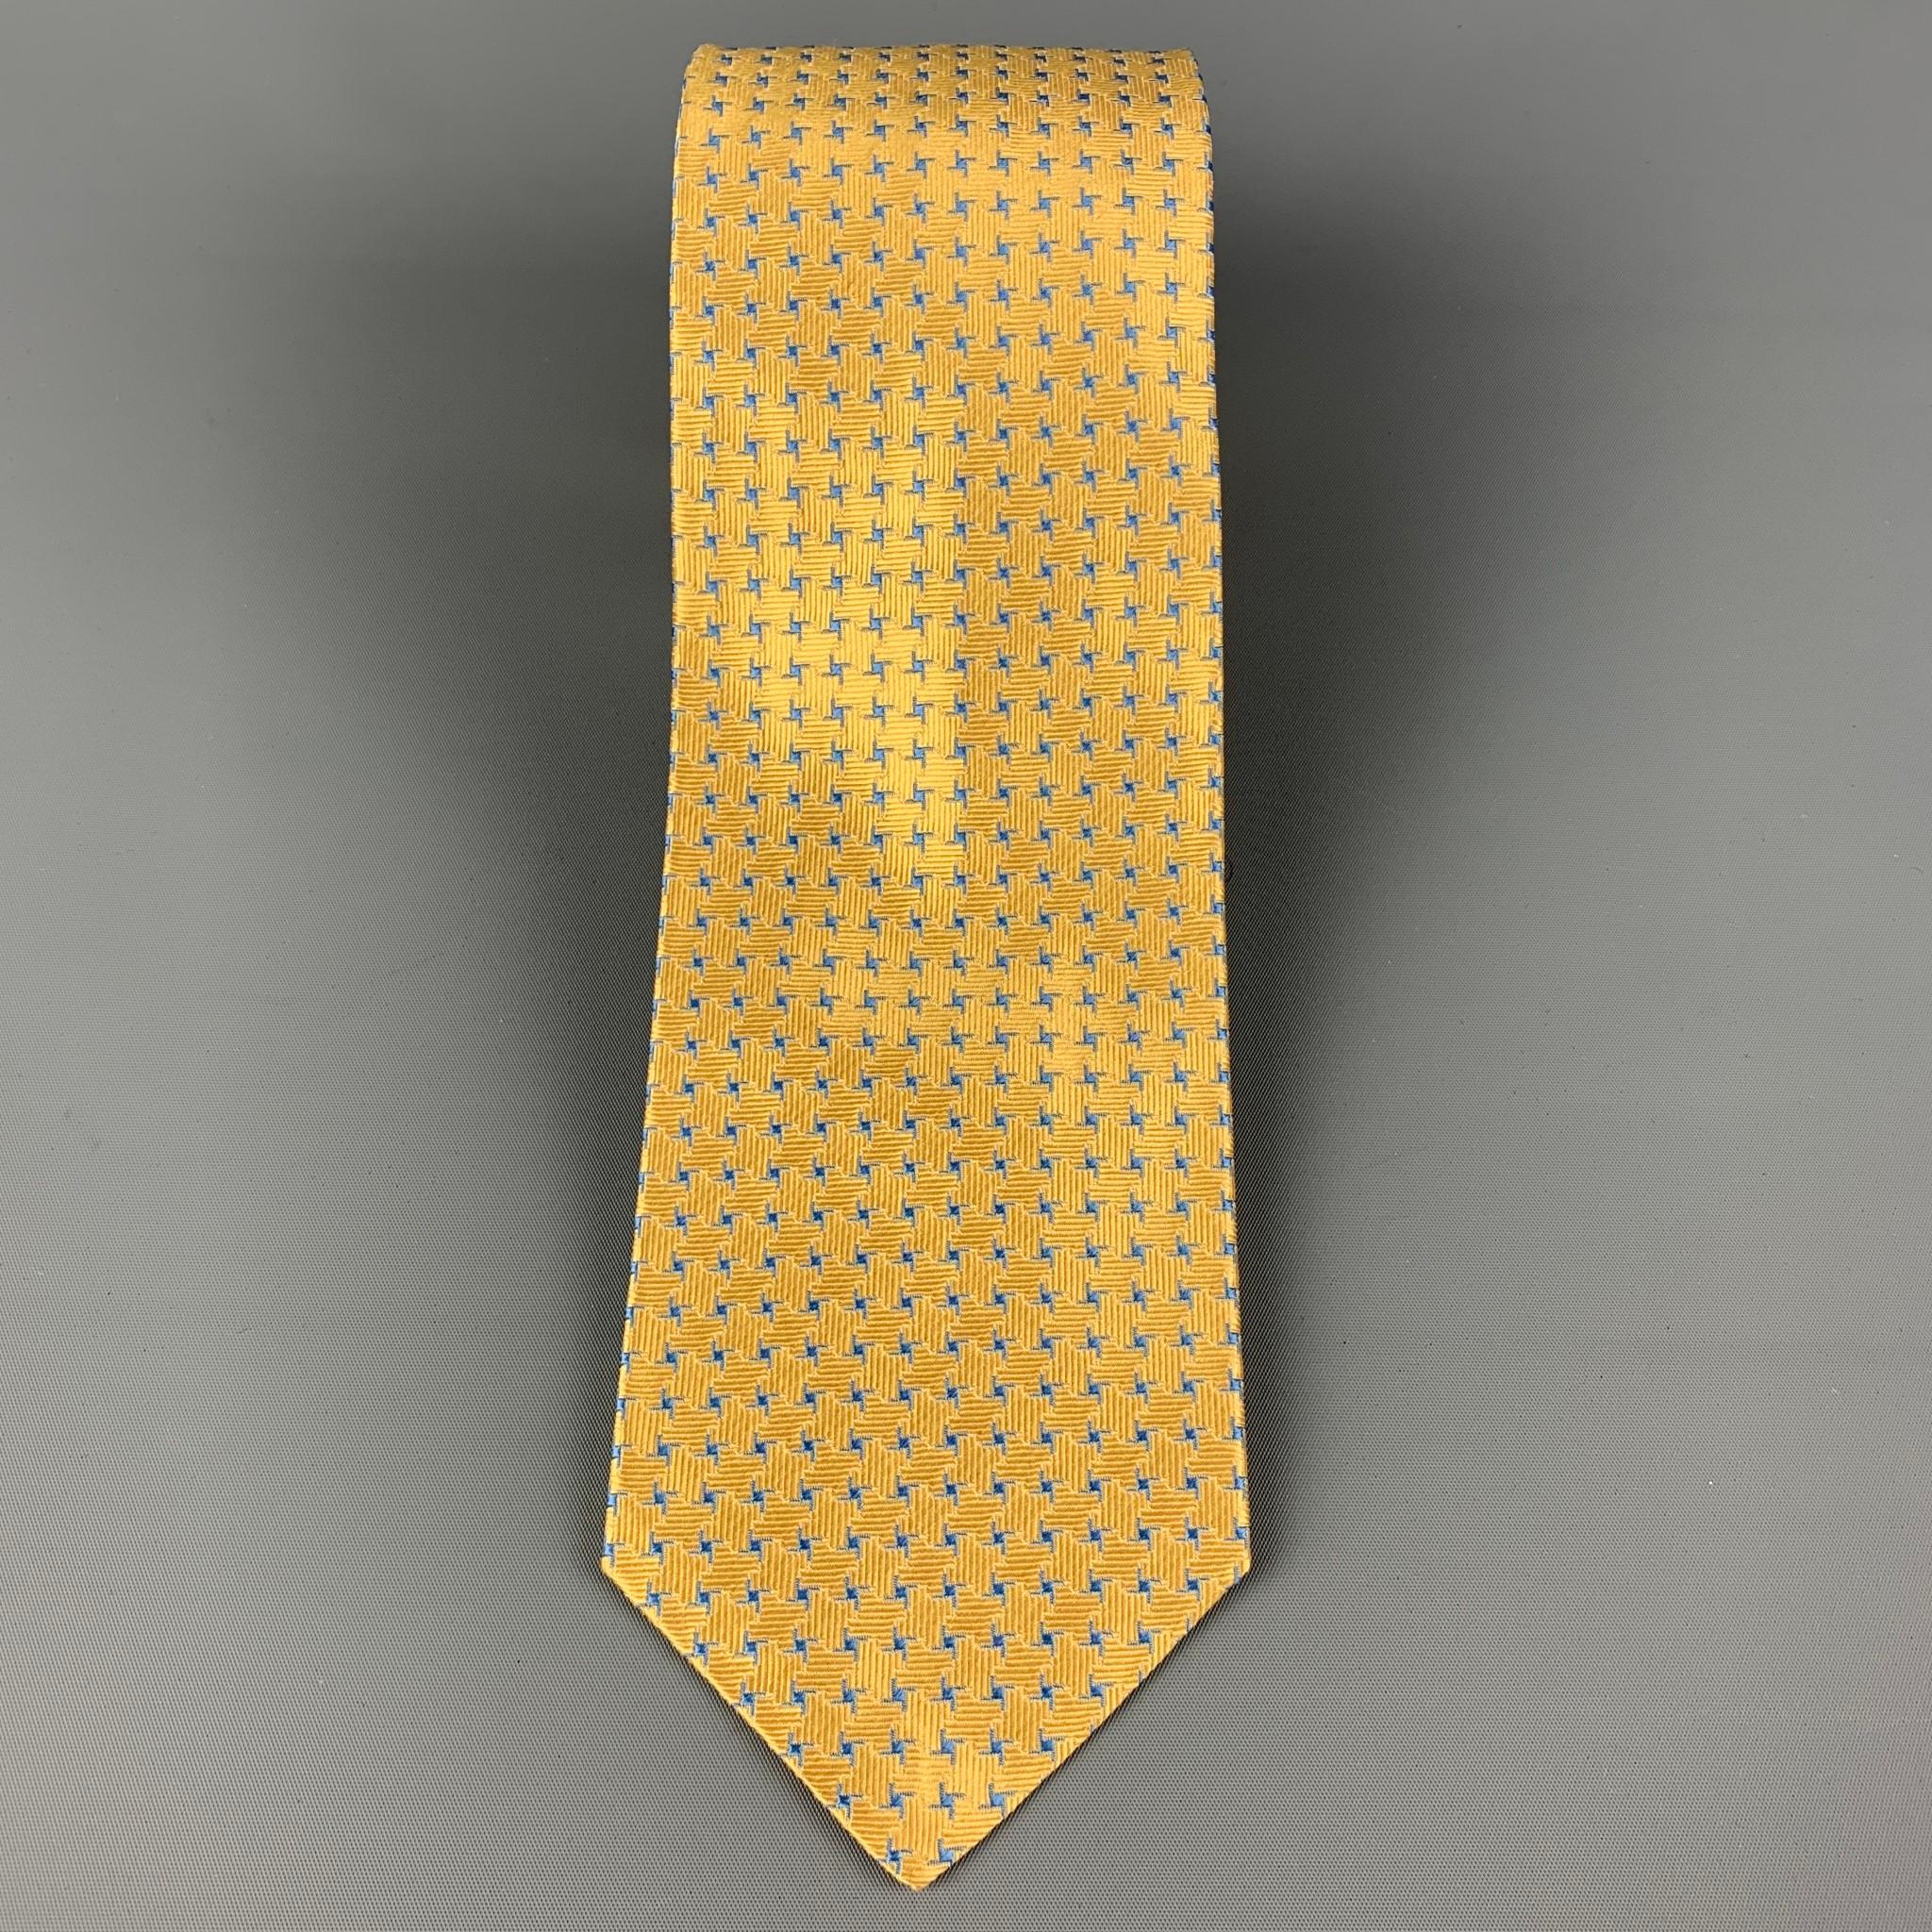 KITON necktie comes in a yellow & blue silk with a all over star print. Made in Italy .

Very Good Pre-Owned Condition.
Original Retail Price: $345.00

Width: 3.5 in.
Length: 58 in. 